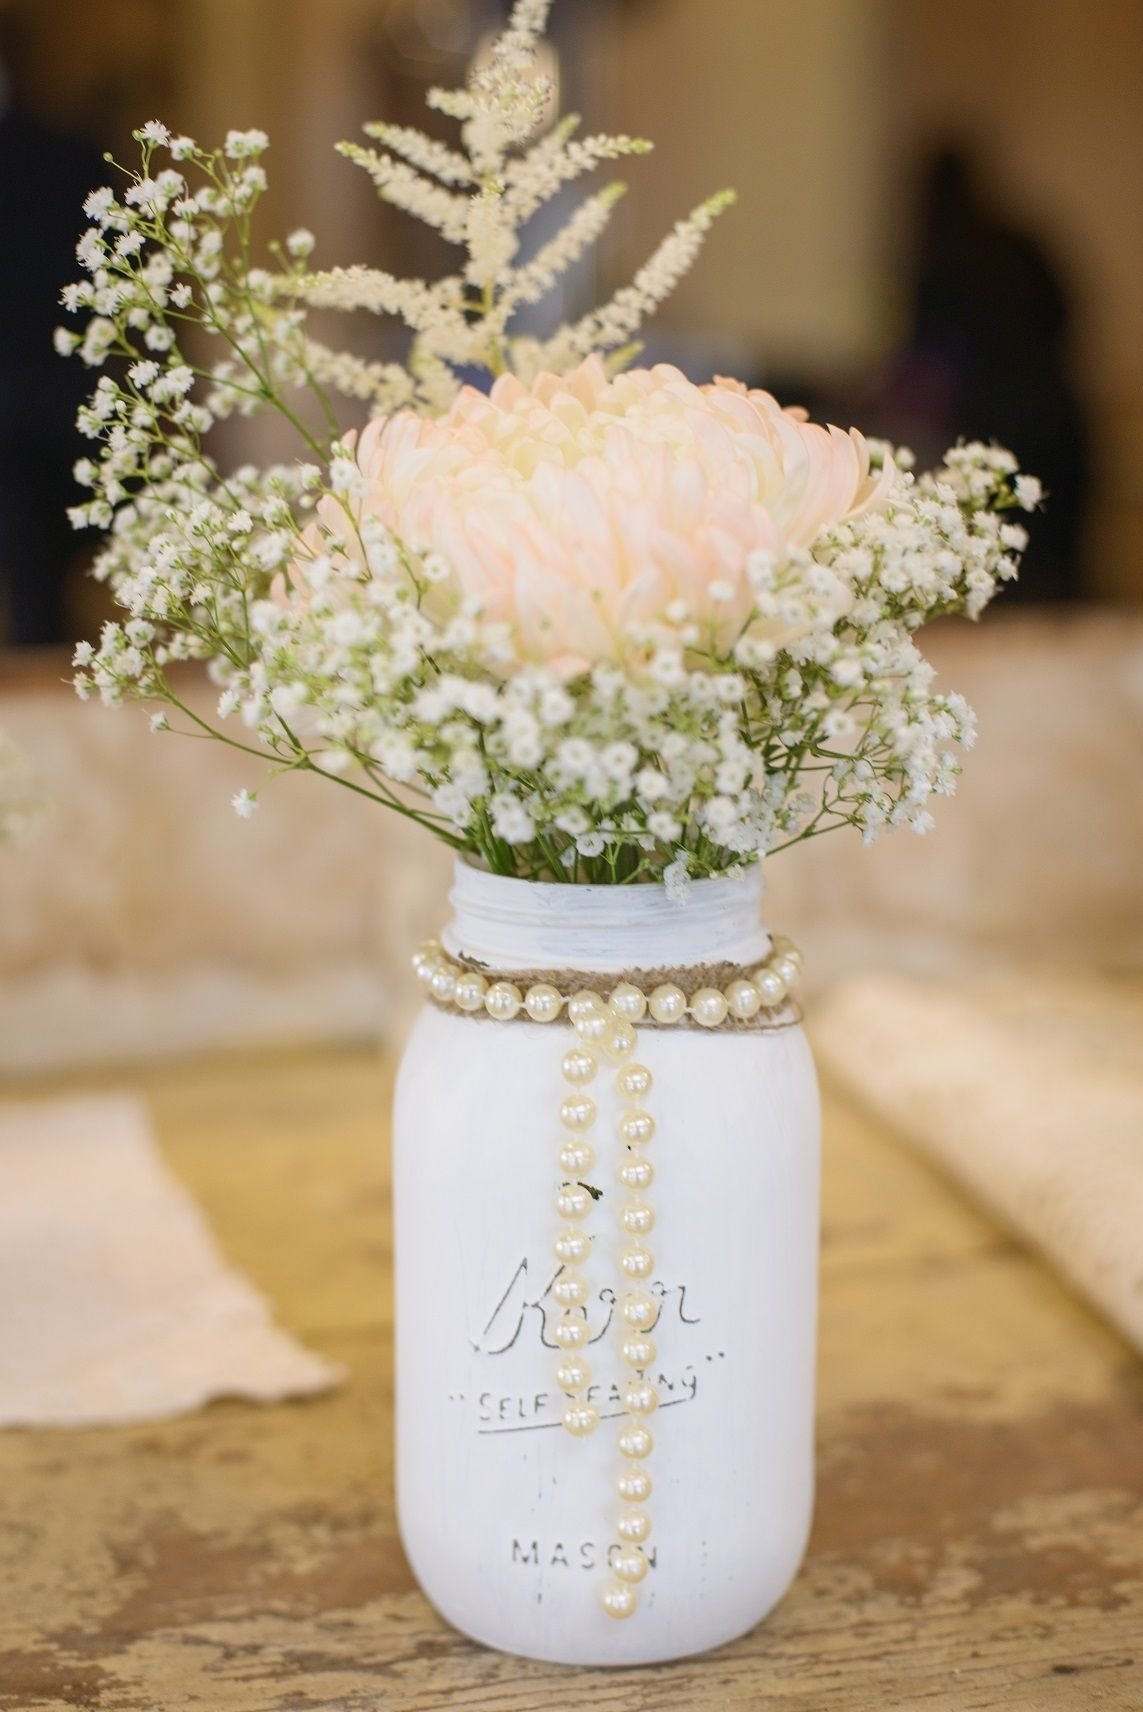 10 Lovable Mason Jar Ideas For Weddings centerpieces dont have to be expensive diy your reception 2022